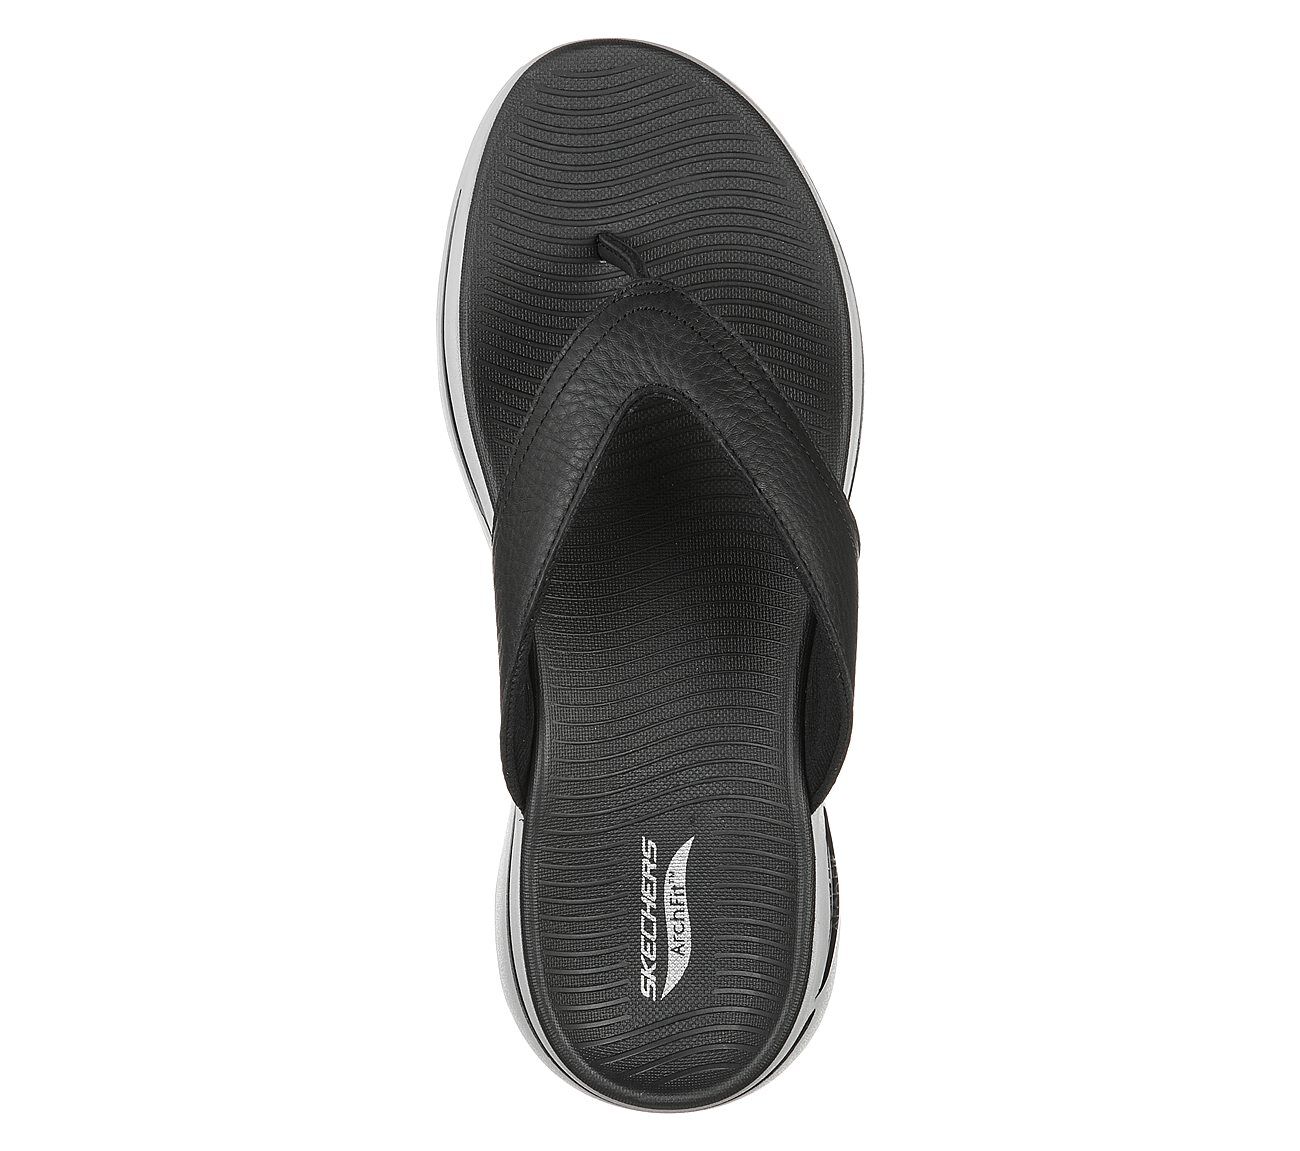 Buy Skechers Slippers Online In India At Best Price Offers | Tata CLiQ